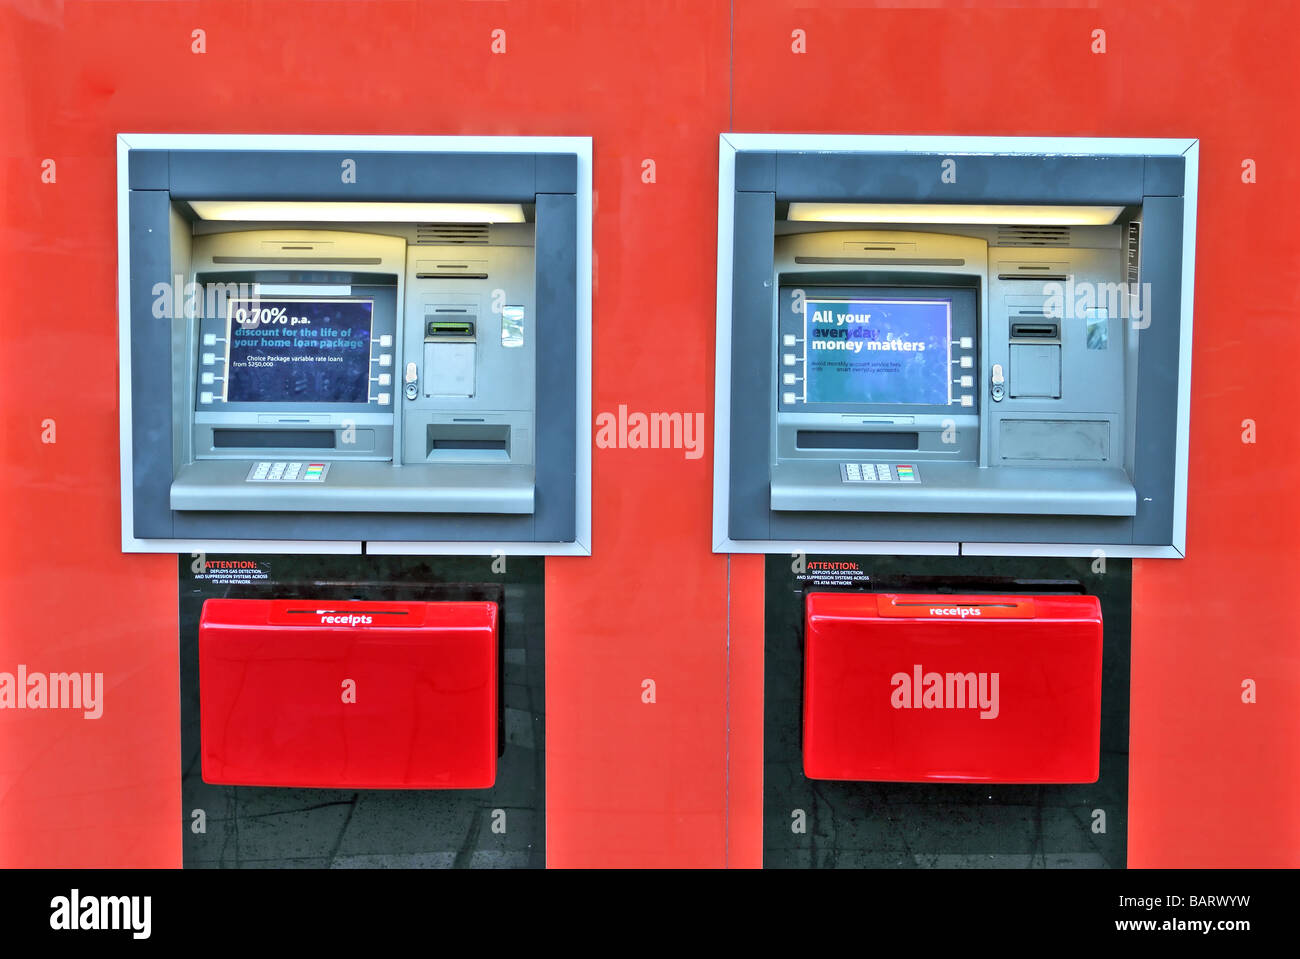 Bank ATM automated financial machine Stock Photo